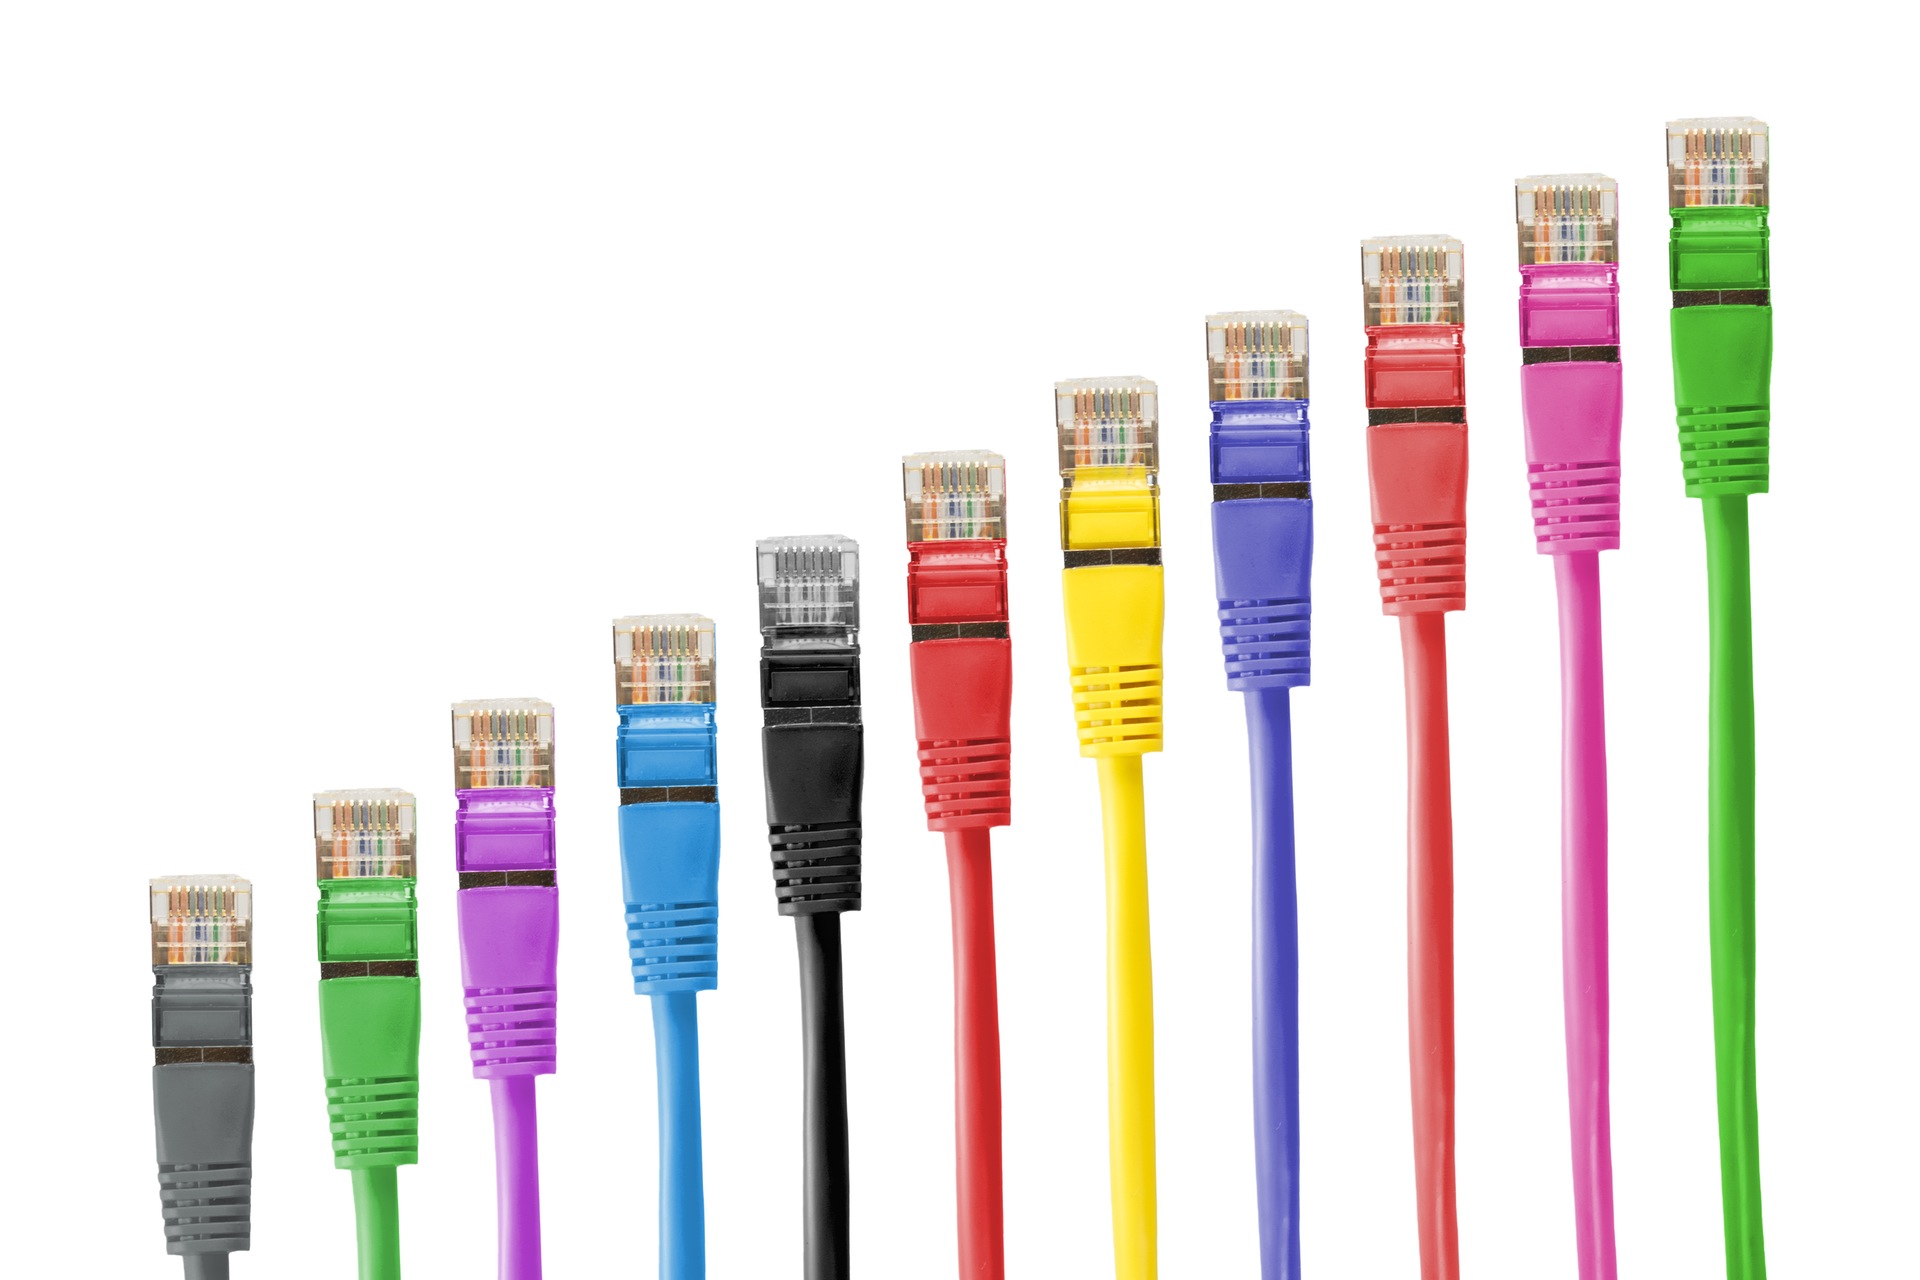 Cat5 vs. Cat6 Cable - Which is Right for You?